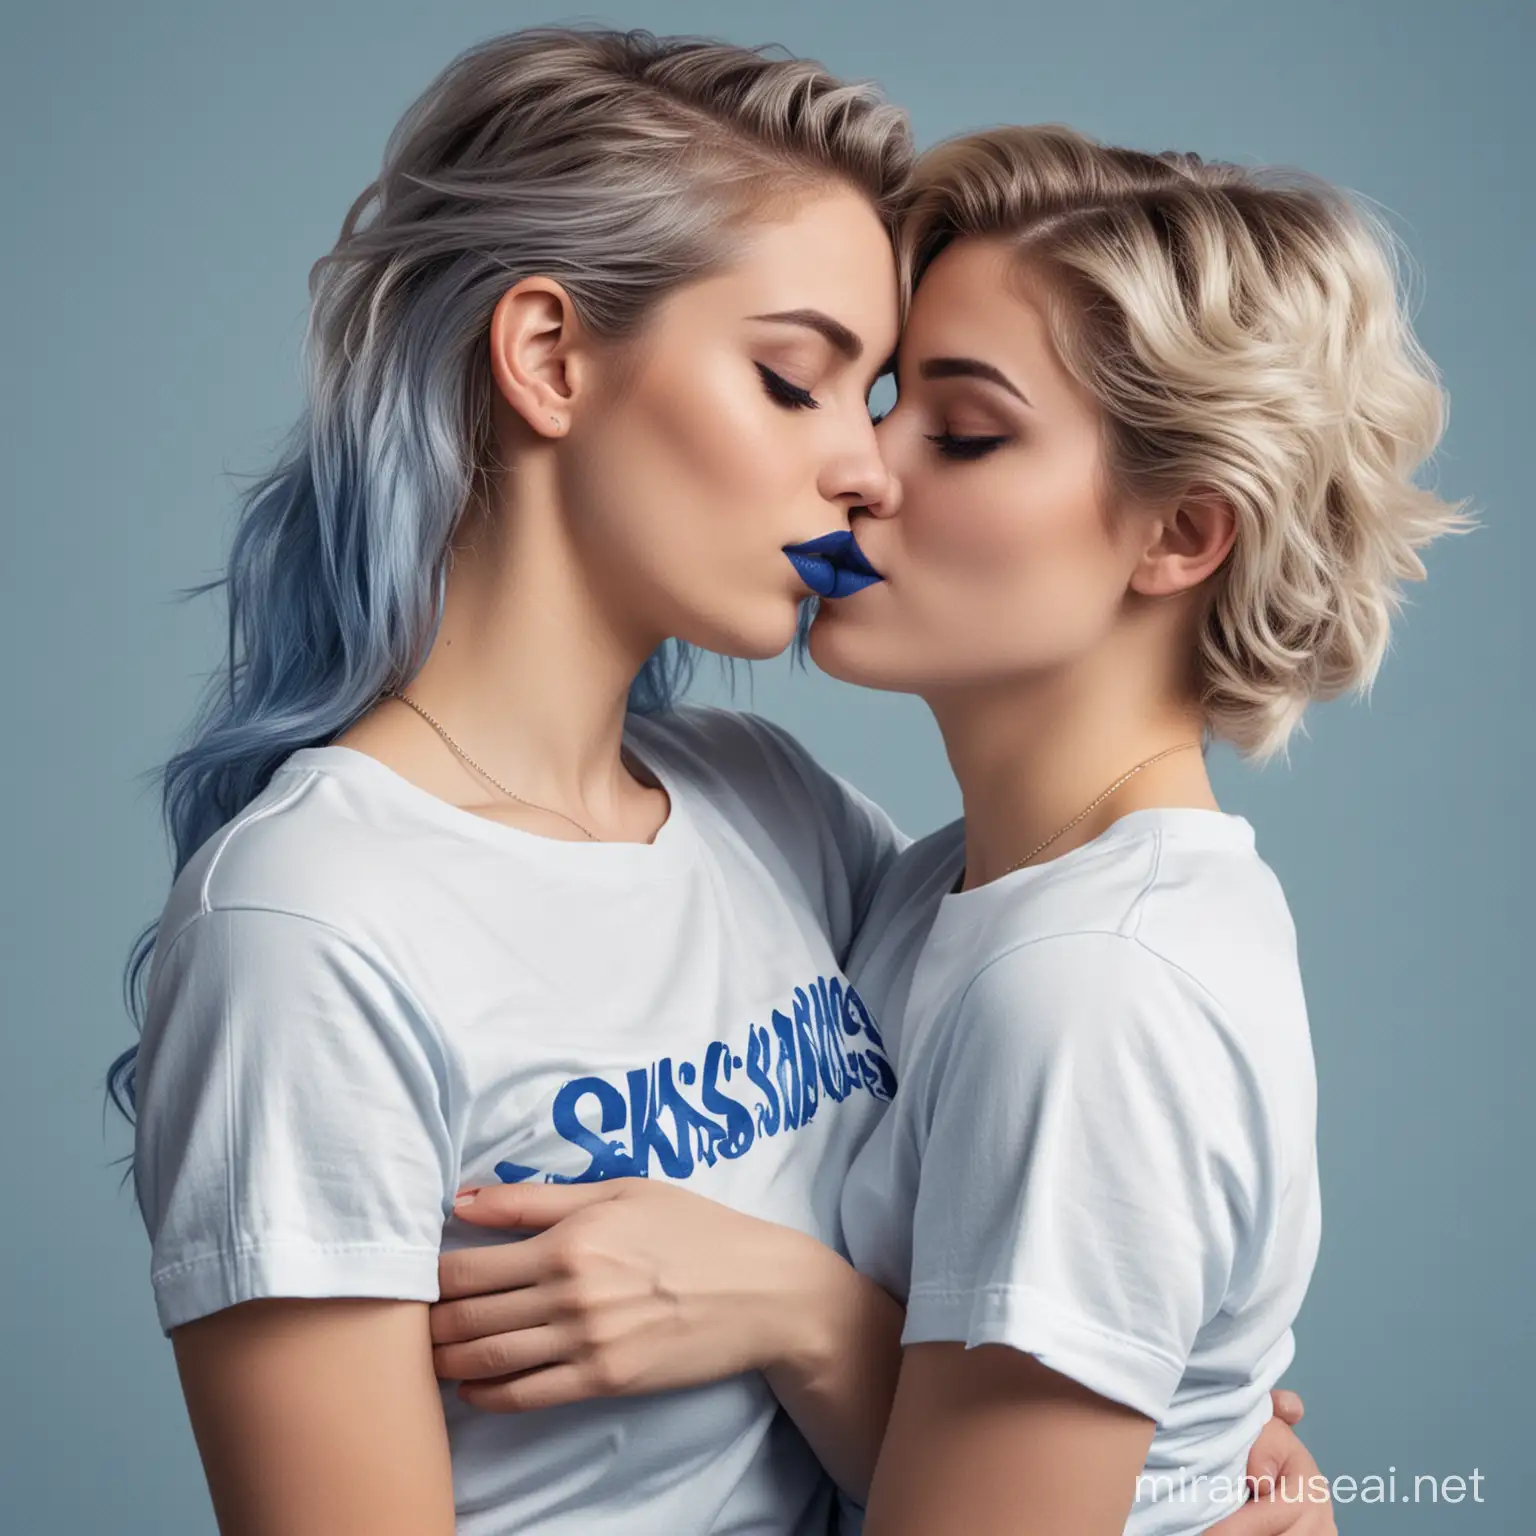 Affectionate Lesbian Couple Embracing and Kissing with Royal Blue Makeup